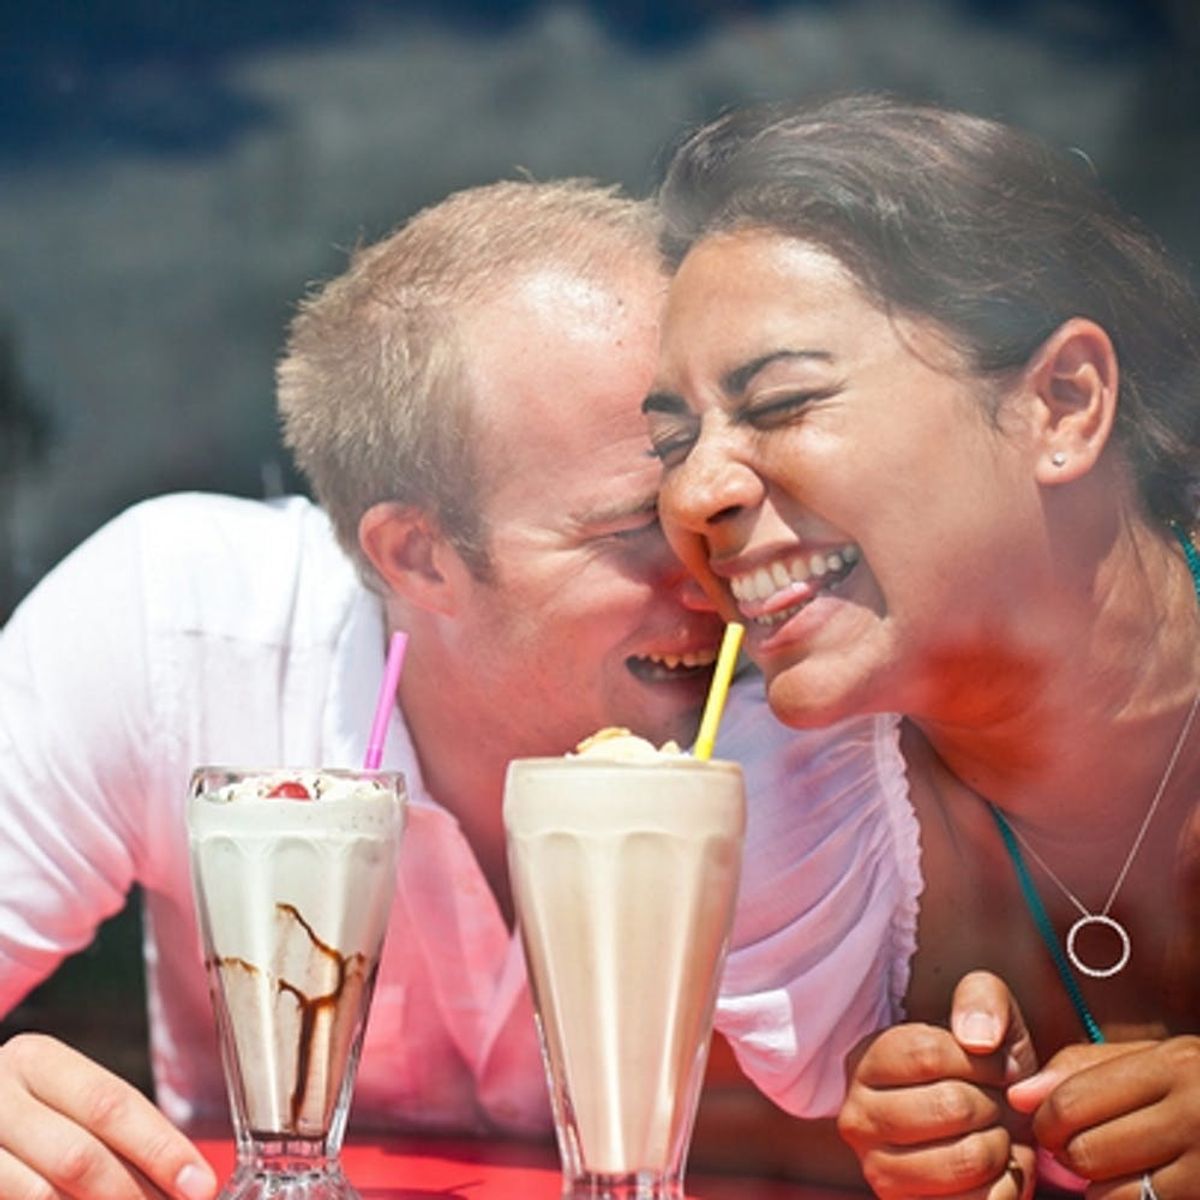 15 Creative First Dates You Should Try This Summer